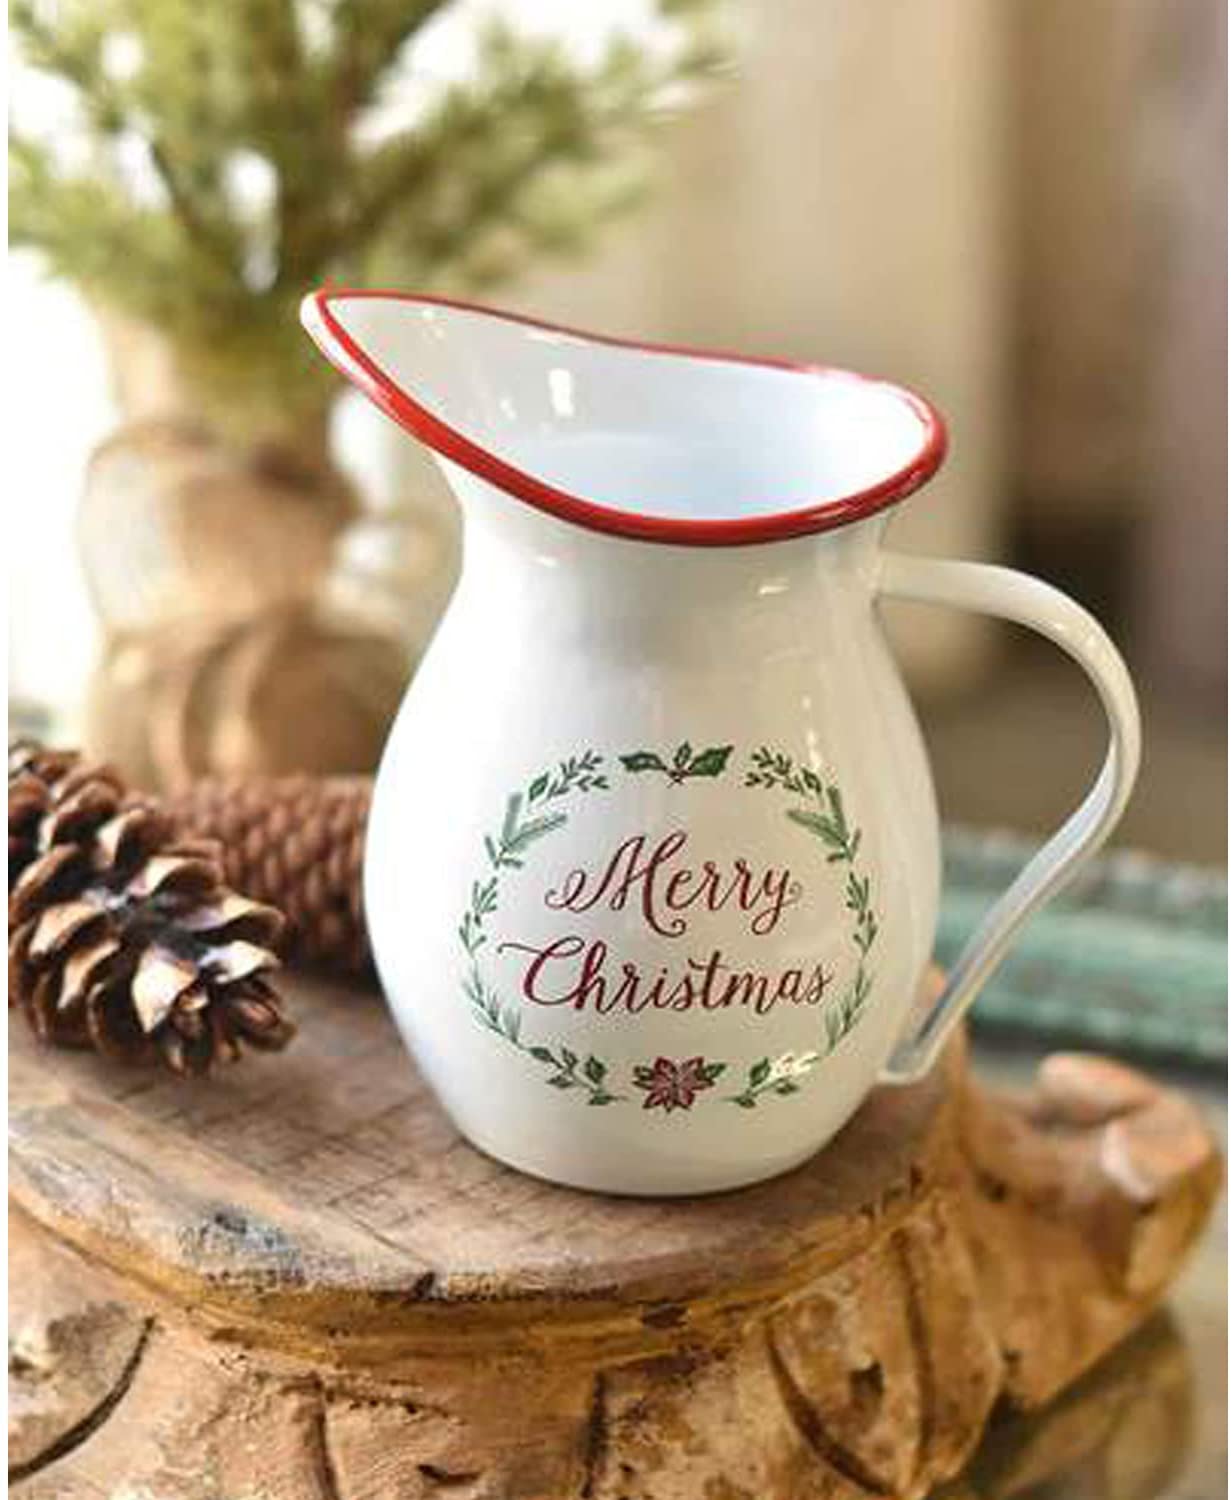 7-Inch Rustic White, Red and Green Merry Christmas Decorative Enameled  Metal Pitcher Jug with Handle - Country Farmhouse Tabletop Flower Vase 